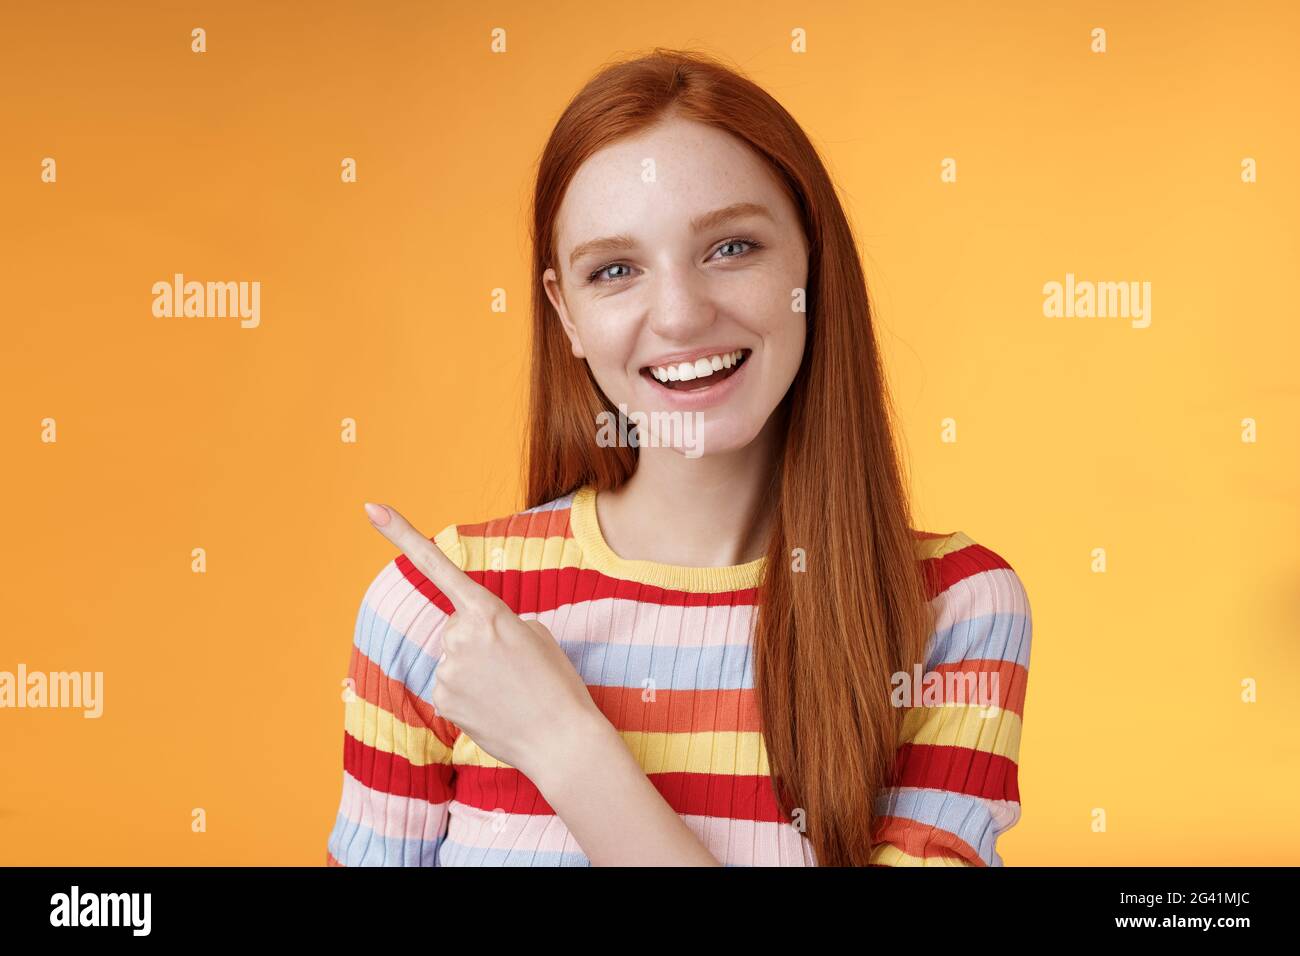 Friendly outgoing good-looking ginger girl university student discussing lecture classmate smiling laughing pointing upper left Stock Photo